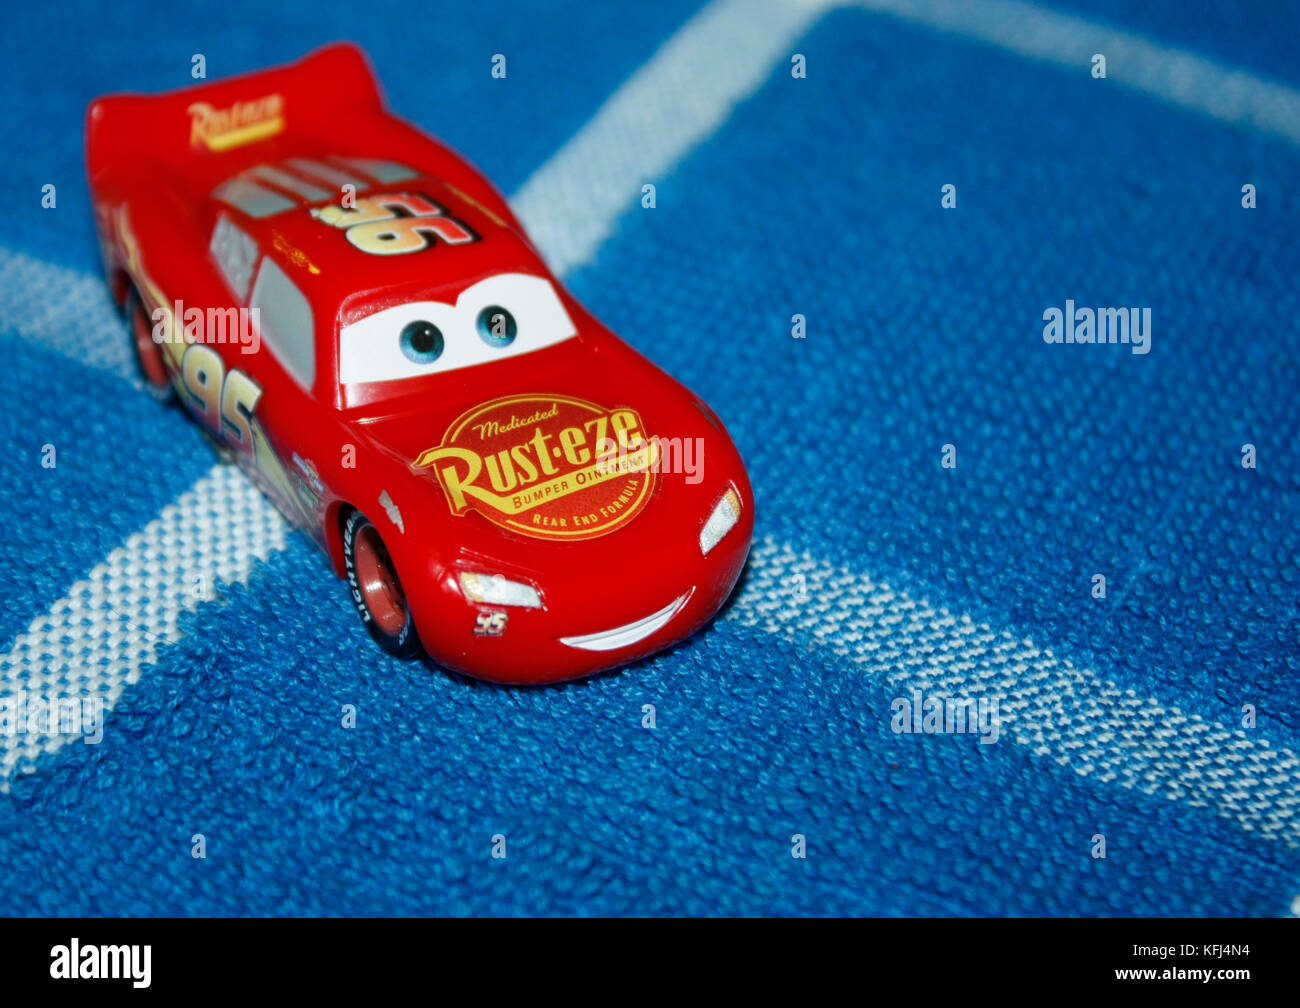 Lightning McQueen Rocket Racer Car - GO!!! – The Red Balloon Toy Store